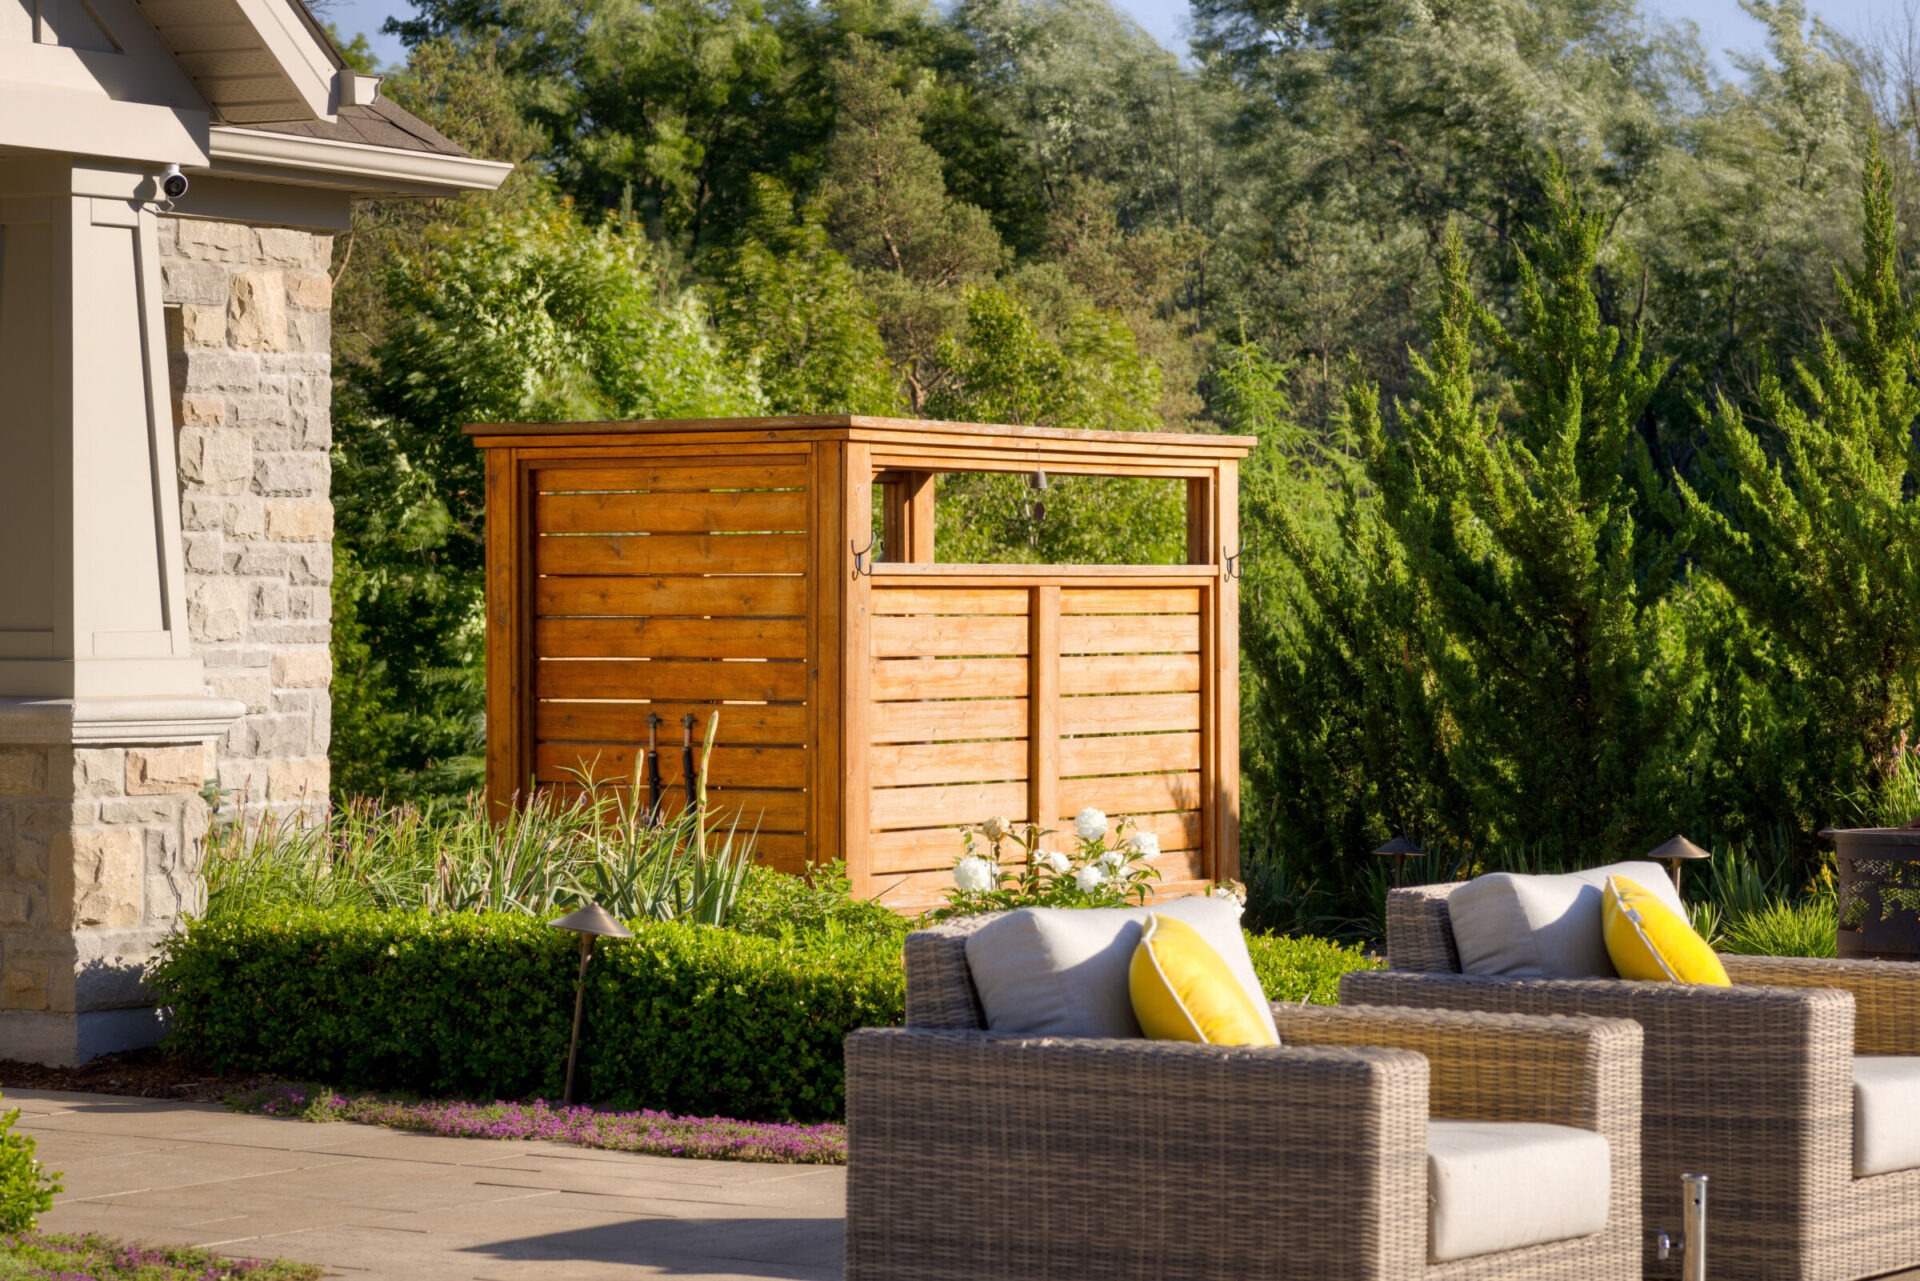 A cozy outdoor patio with wicker furniture and yellow cushions, adjacent to lush greenery and a stylish wooden privacy screen, under clear skies.